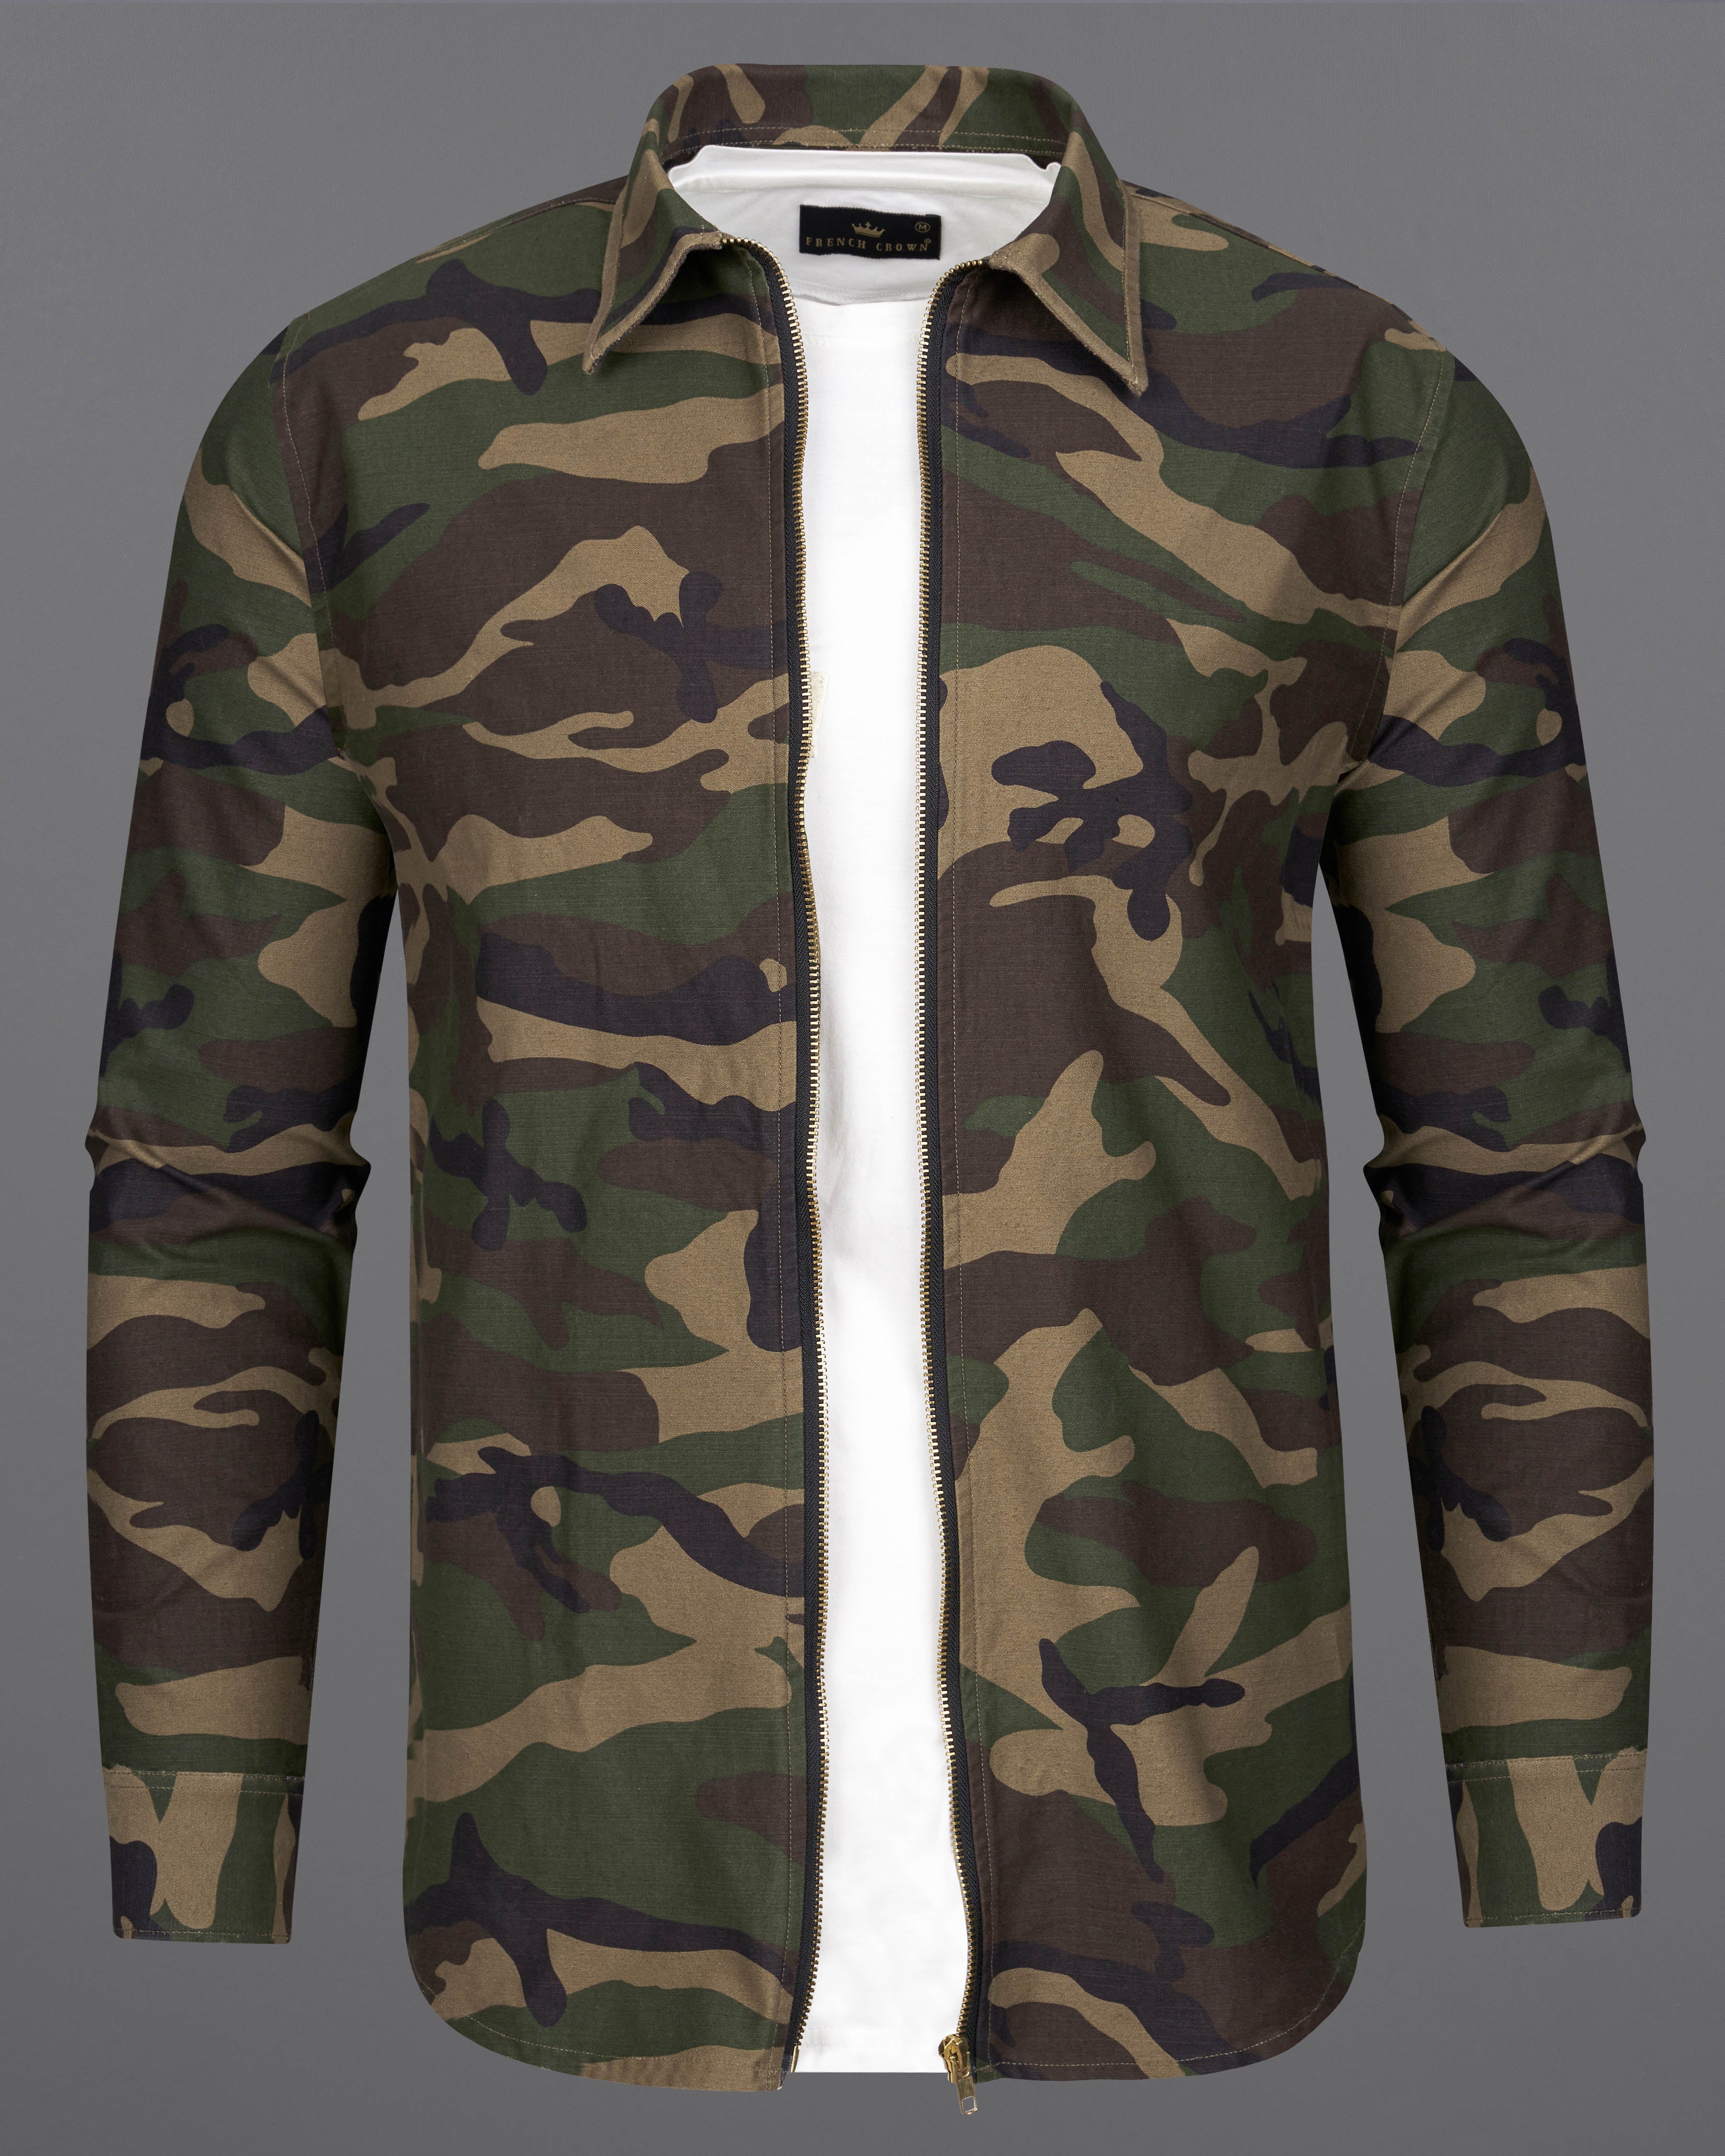 Rifle Green with Dune Brown Camouflage Royal Oxford Overshirt with Zipper Closure 9230-ZP-D124-38,9230-ZP-D124-H-38,9230-ZP-D124-39,9230-ZP-D124-H-39,9230-ZP-D124-40,9230-ZP-D124-H-40,9230-ZP-D124-42,9230-ZP-D124-H-42,9230-ZP-D124-44,9230-ZP-D124-H-44,9230-ZP-D124-46,9230-ZP-D124-H-46,9230-ZP-D124-48,9230-ZP-D124-H-48,9230-ZP-D124-50,9230-ZP-D124-H-50,9230-ZP-D124-52,9230-ZP-D124-H-52